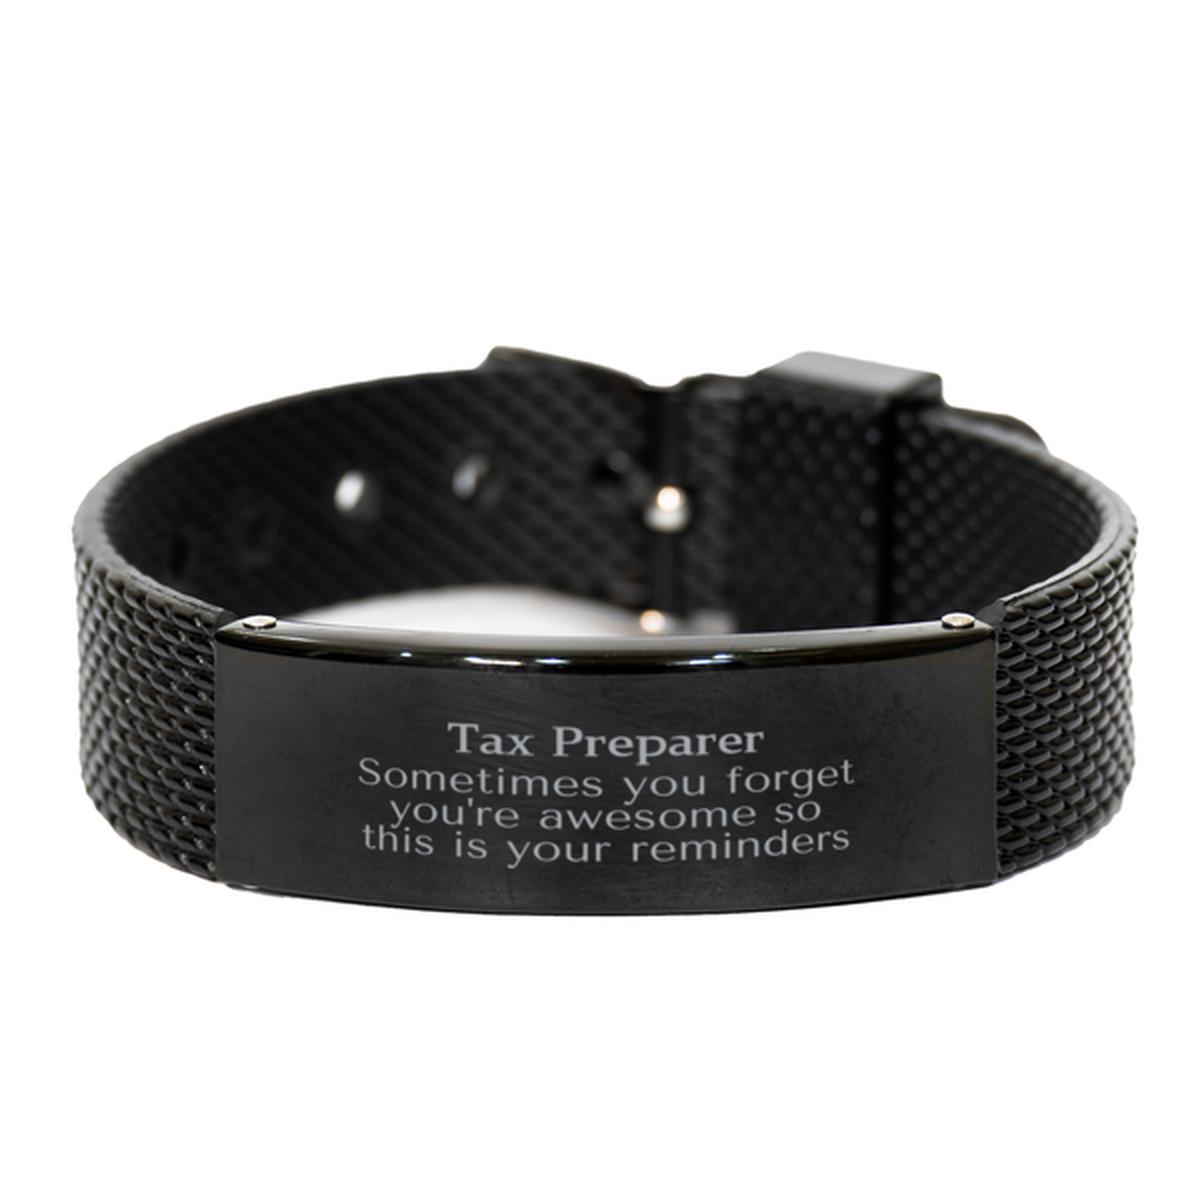 Sentimental Tax Preparer Black Shark Mesh Bracelet, Tax Preparer Sometimes you forget you're awesome so this is your reminders, Graduation Christmas Birthday Gifts for Tax Preparer, Men, Women, Coworkers